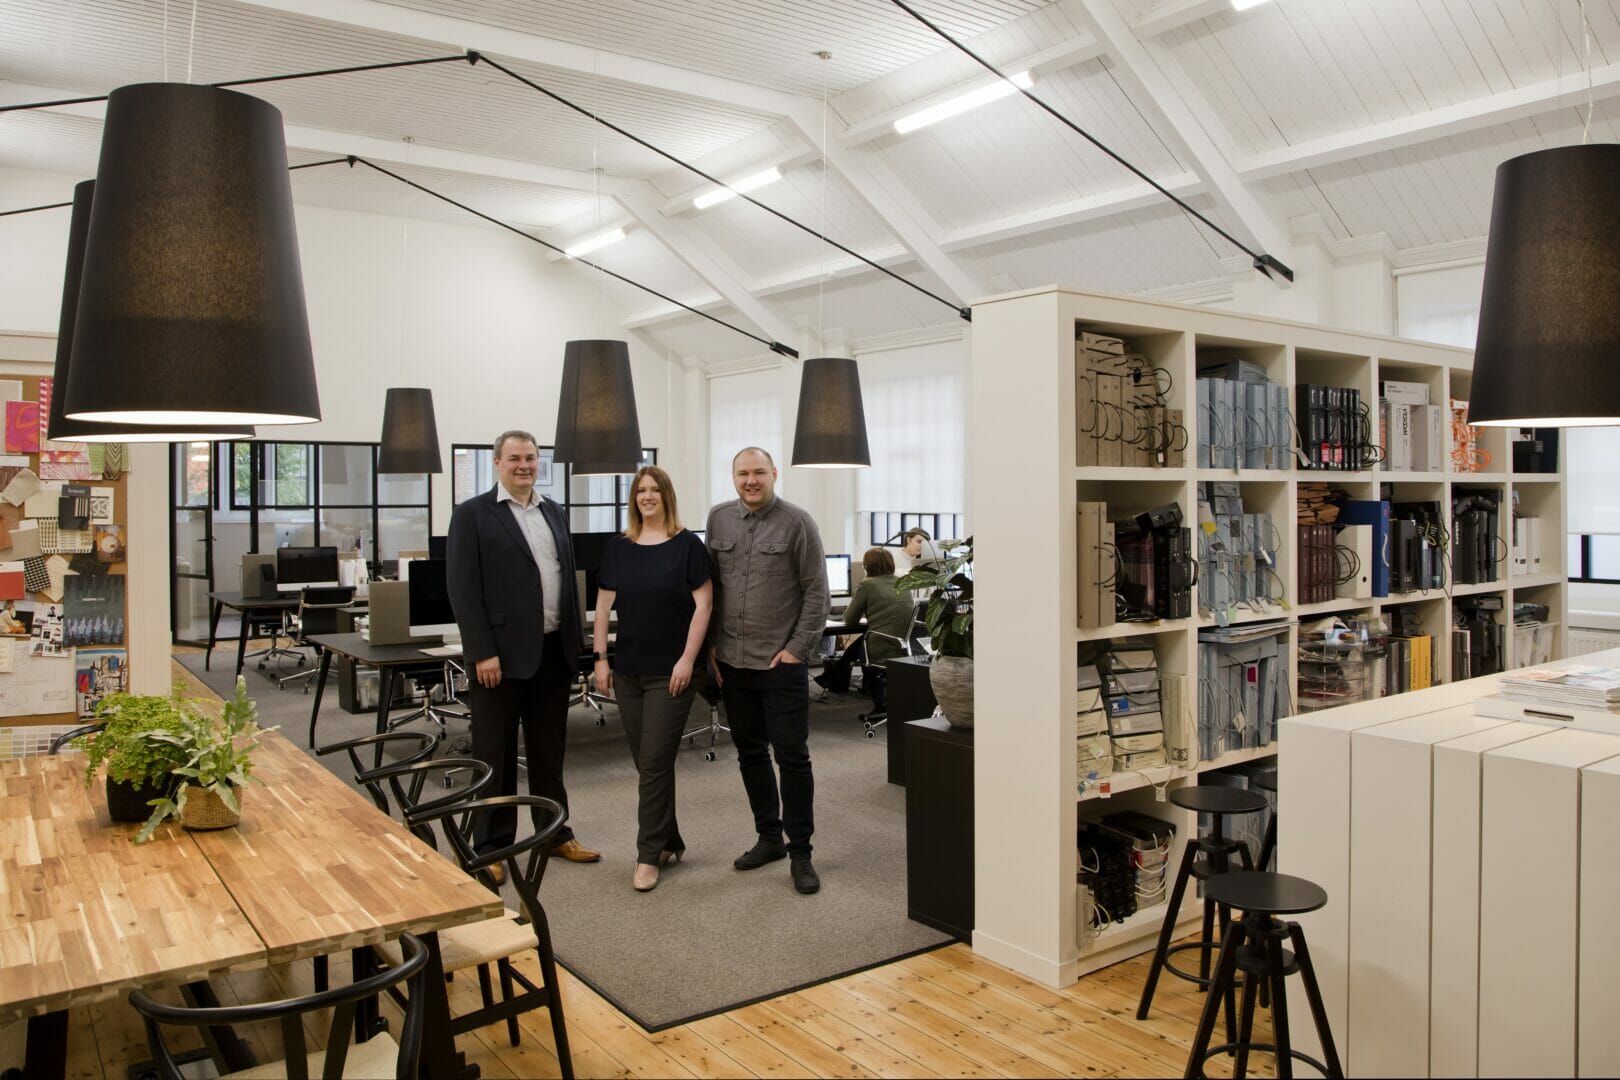 Bernard Interiors has designs on growth with support from Edinburgh-based Opal  @Opal_IT_Ltd